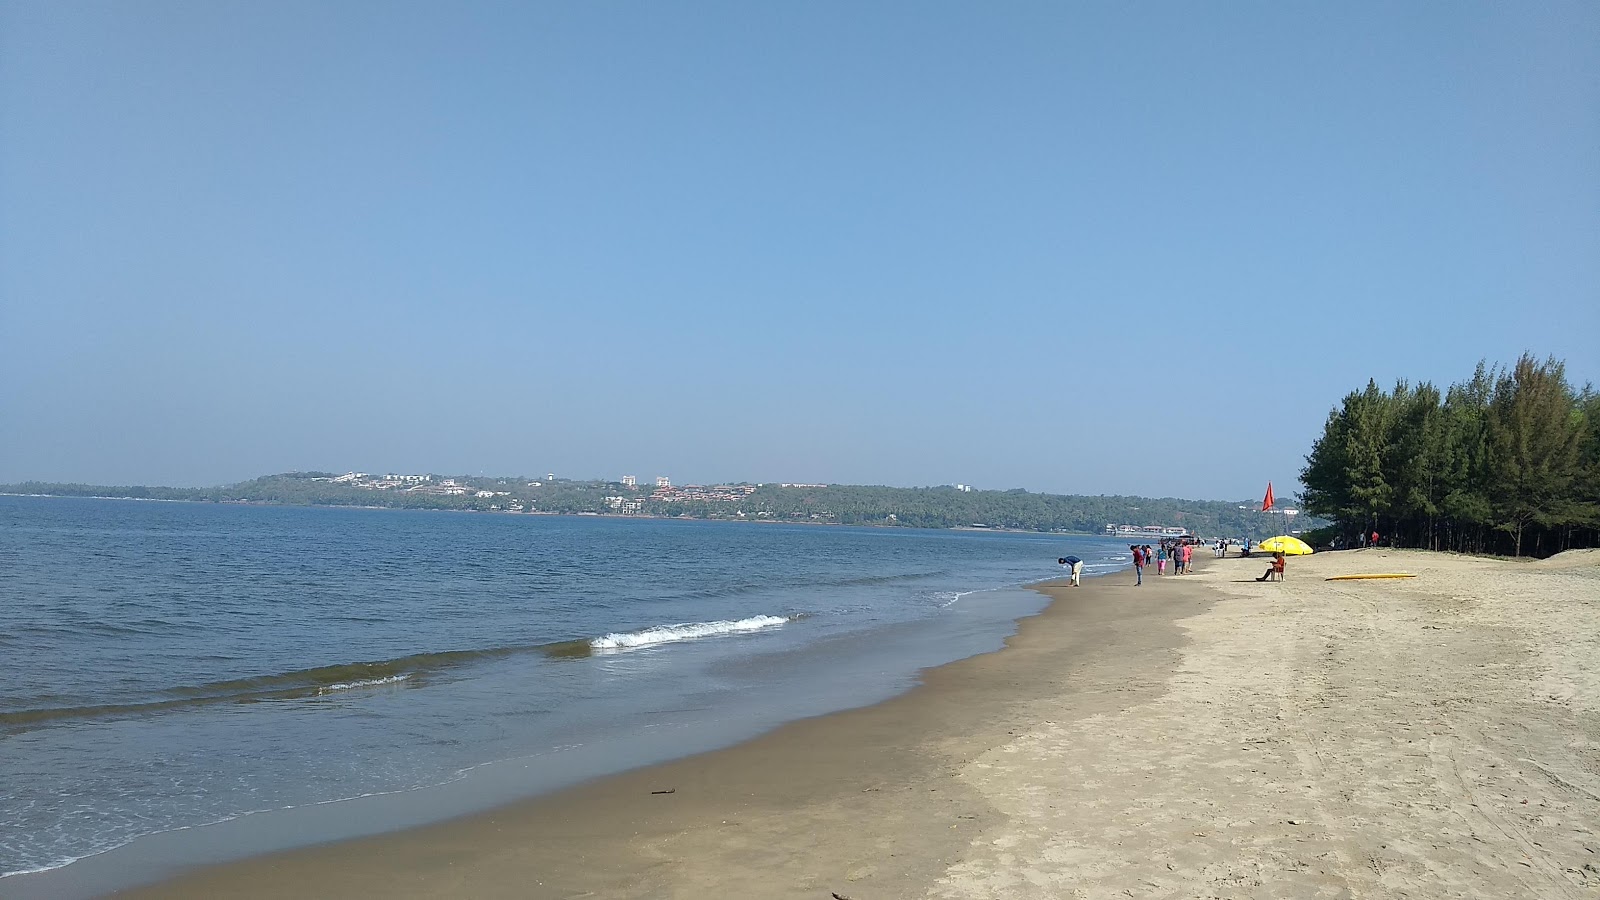 Photo of Miramar Beach with very clean level of cleanliness